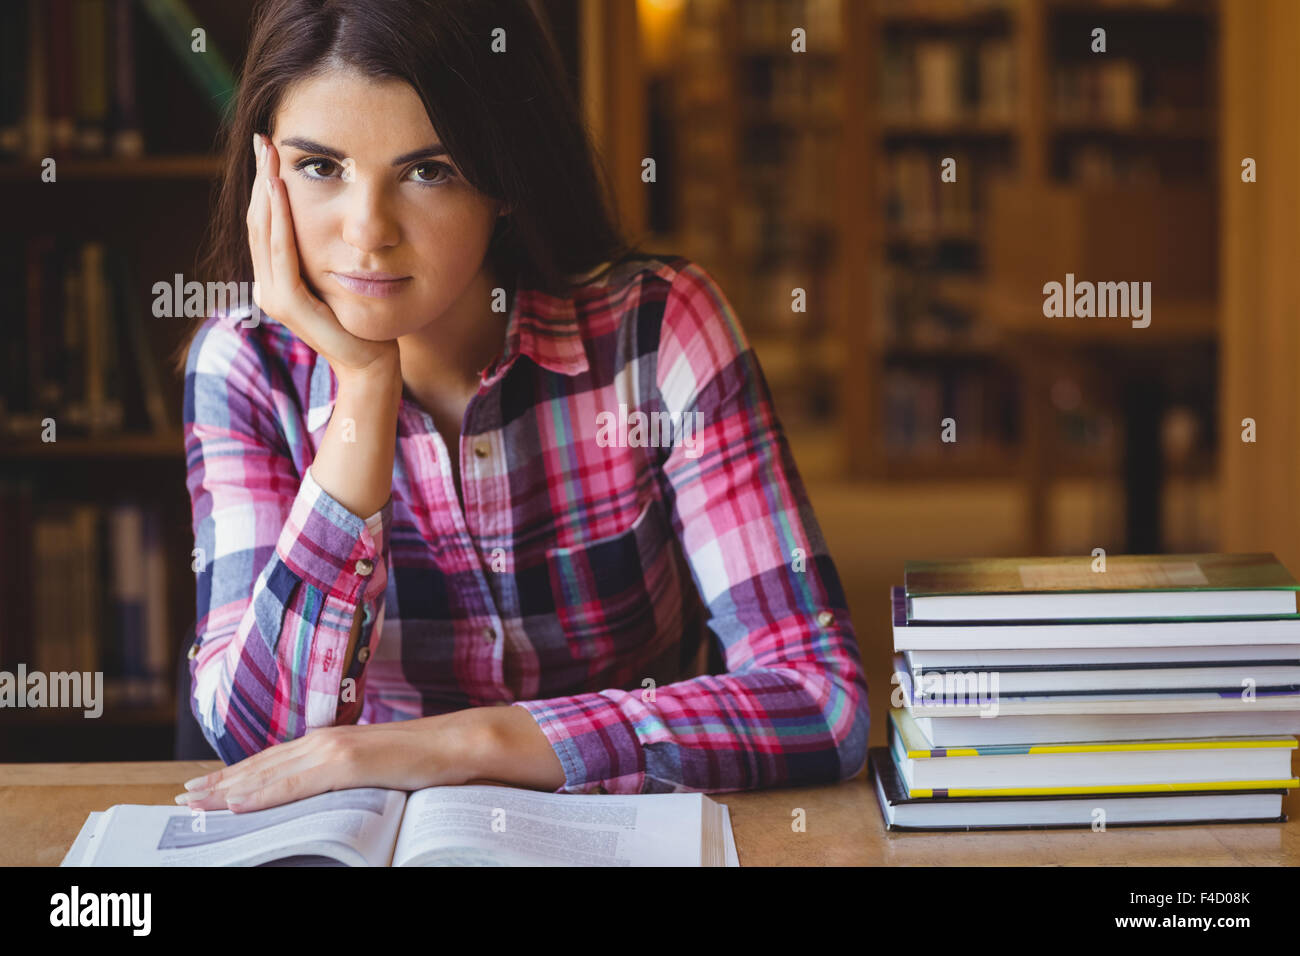 Portrait of female student with book Stock Photo